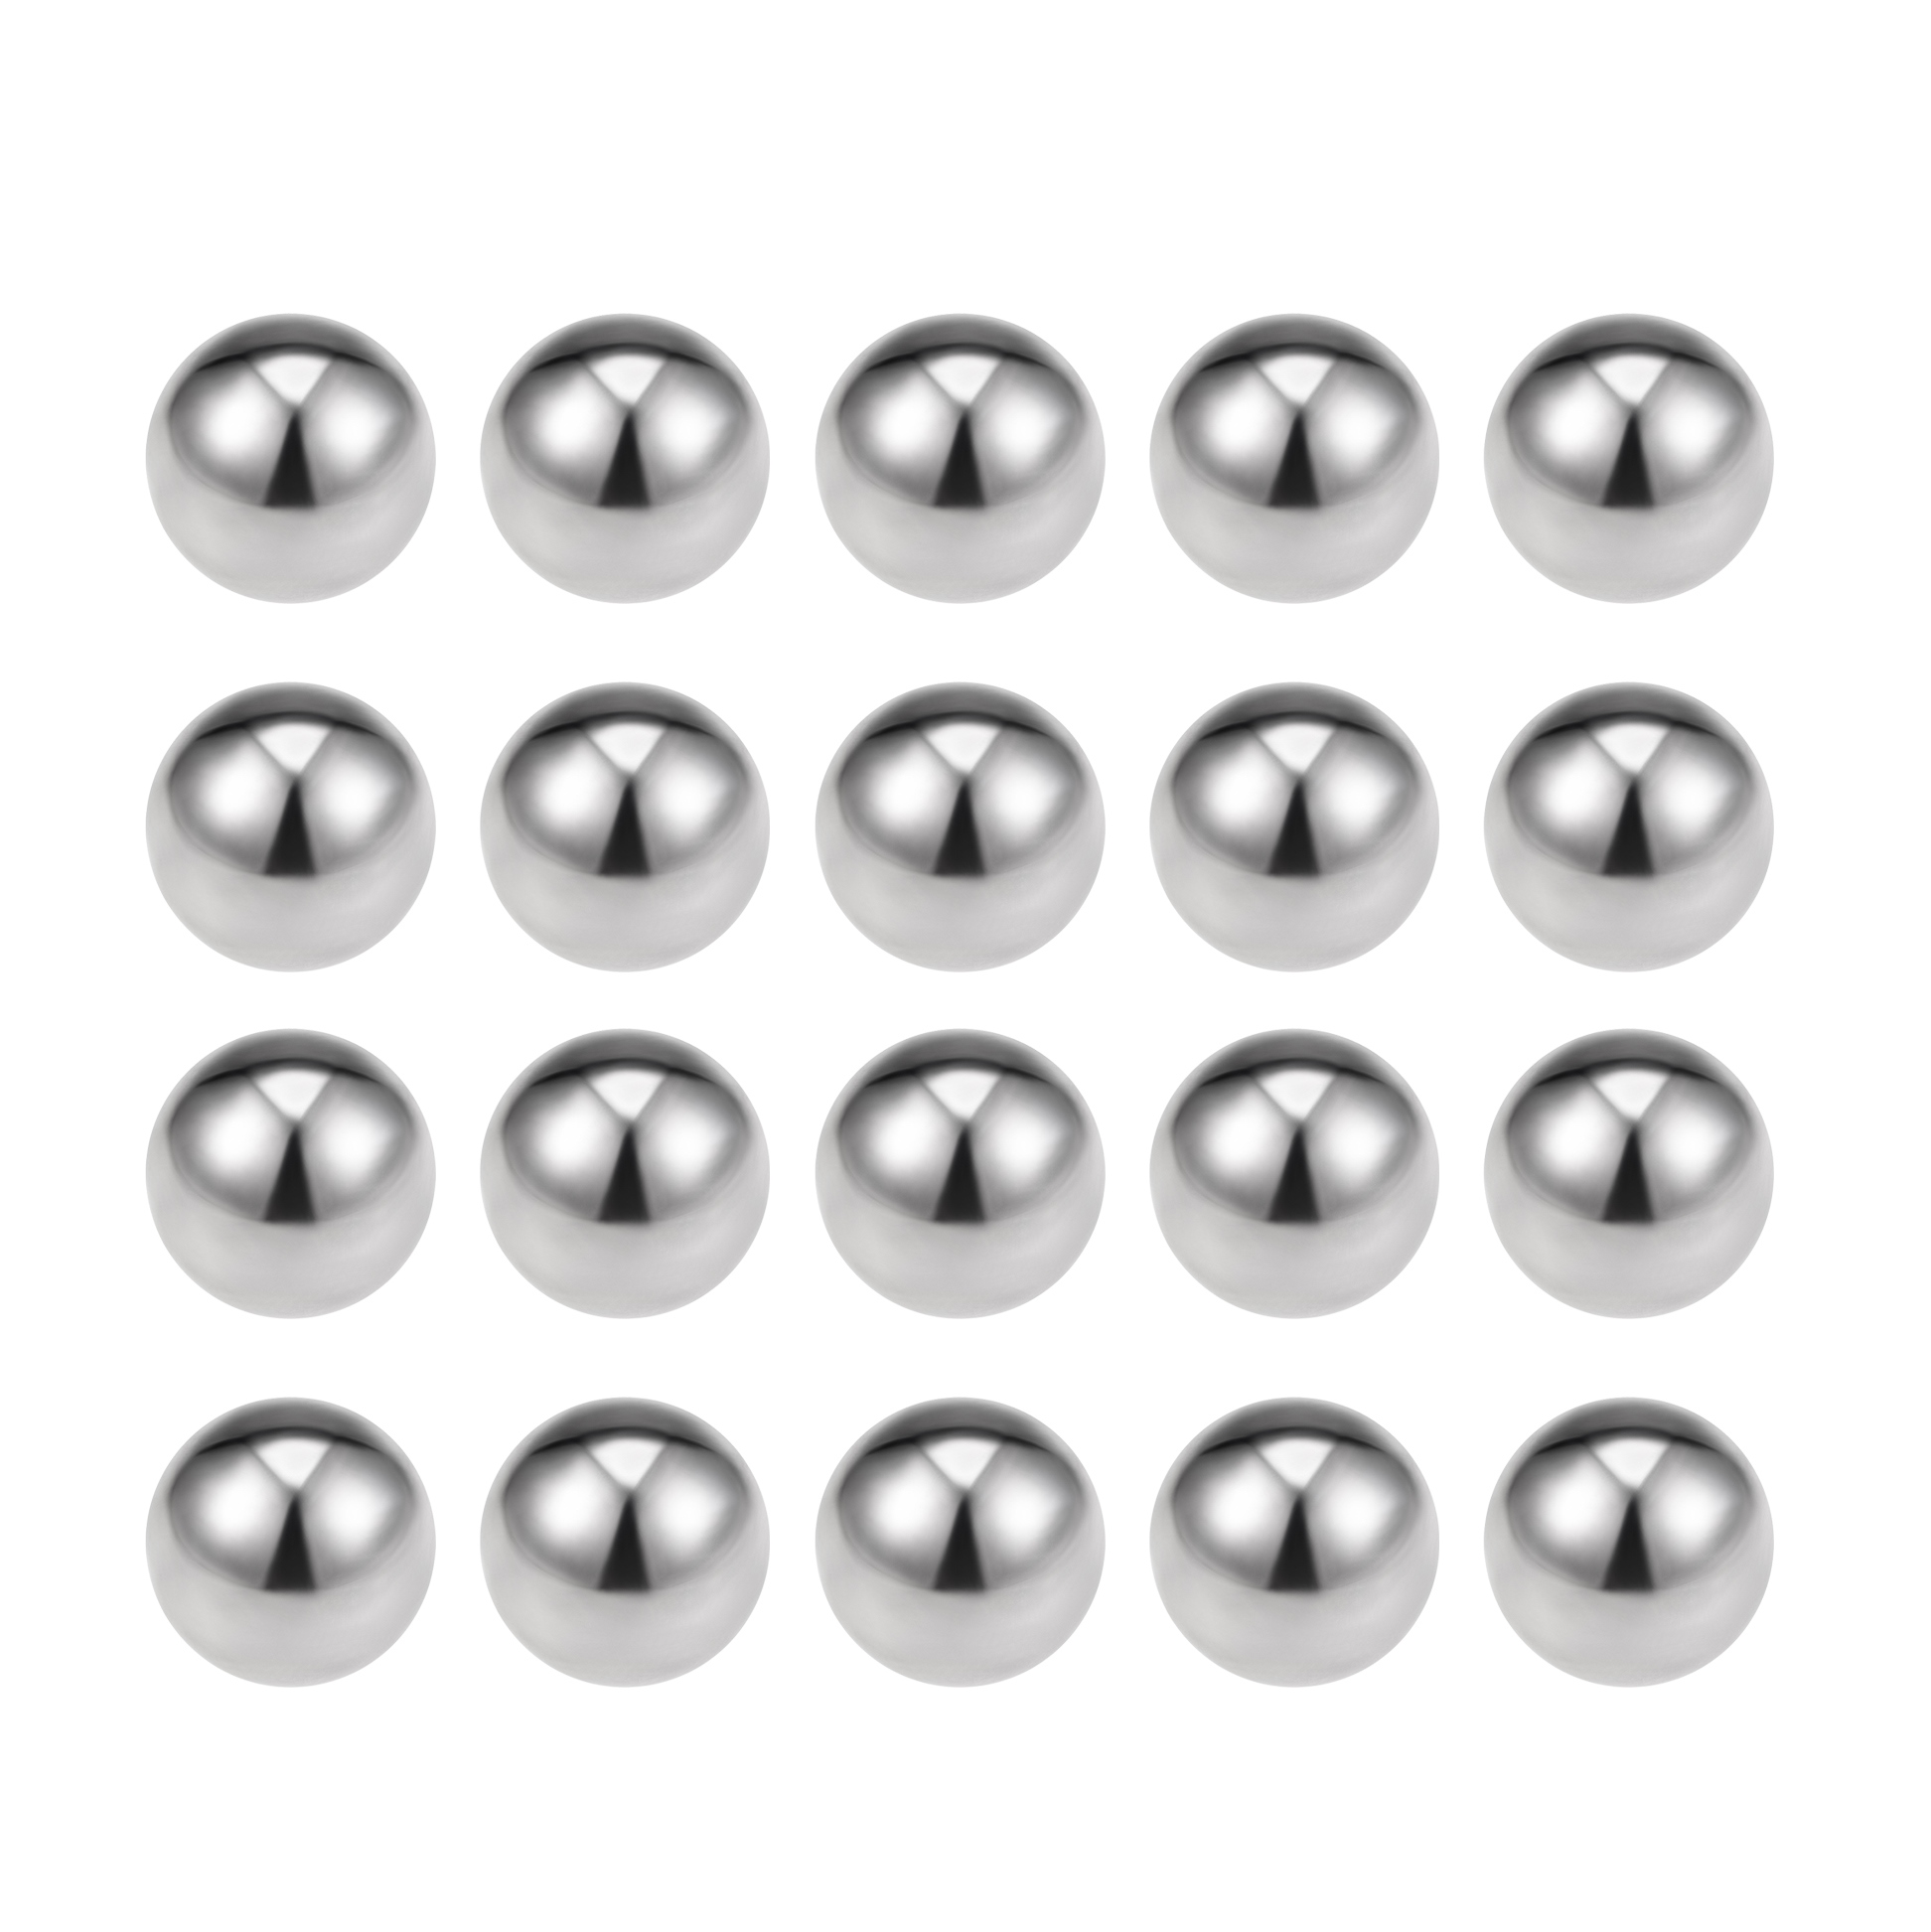 uxcell 3/32-inch Bearing Balls 440C Stainless Steel G25 Precision Balls 500pcs 